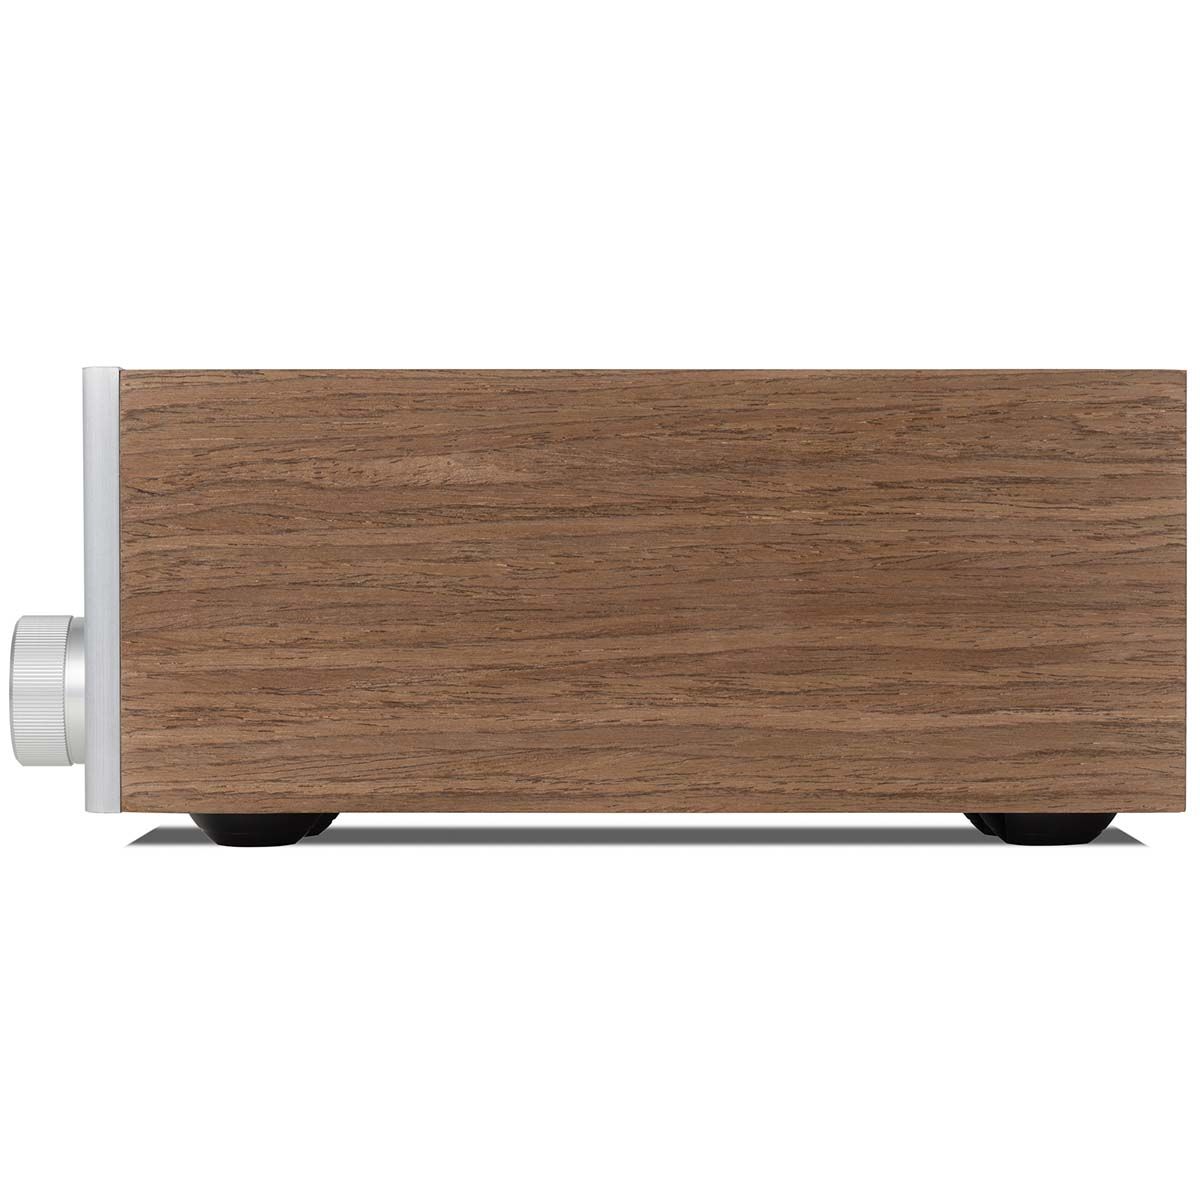 JBL SA750 Streaming Integrated Stereo Amplifier - Walnut right side view